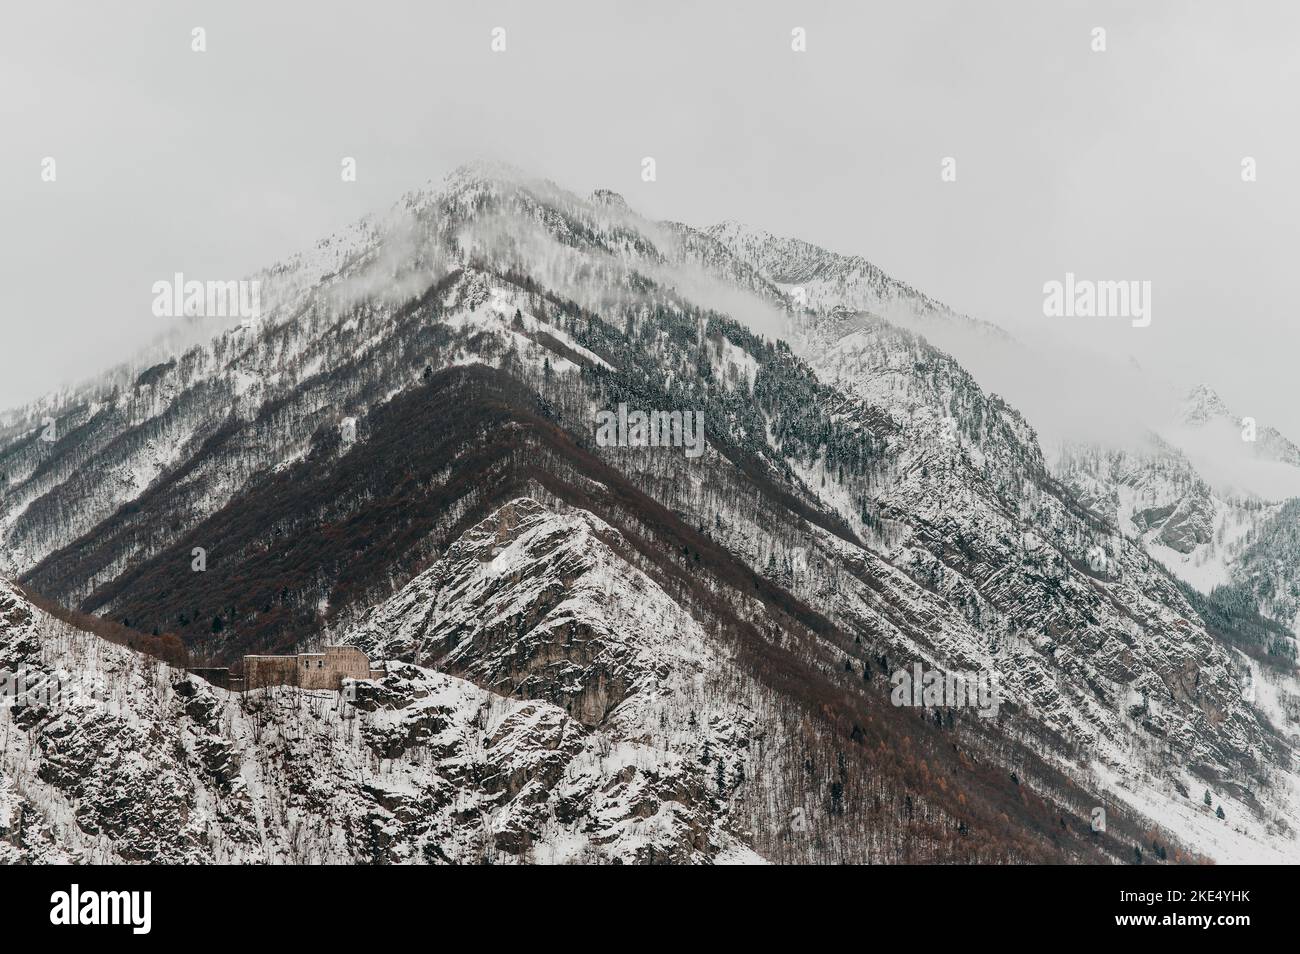 Snow-capped Maritime Alps, Cuneo, Piedmont, Italy Stock Photo